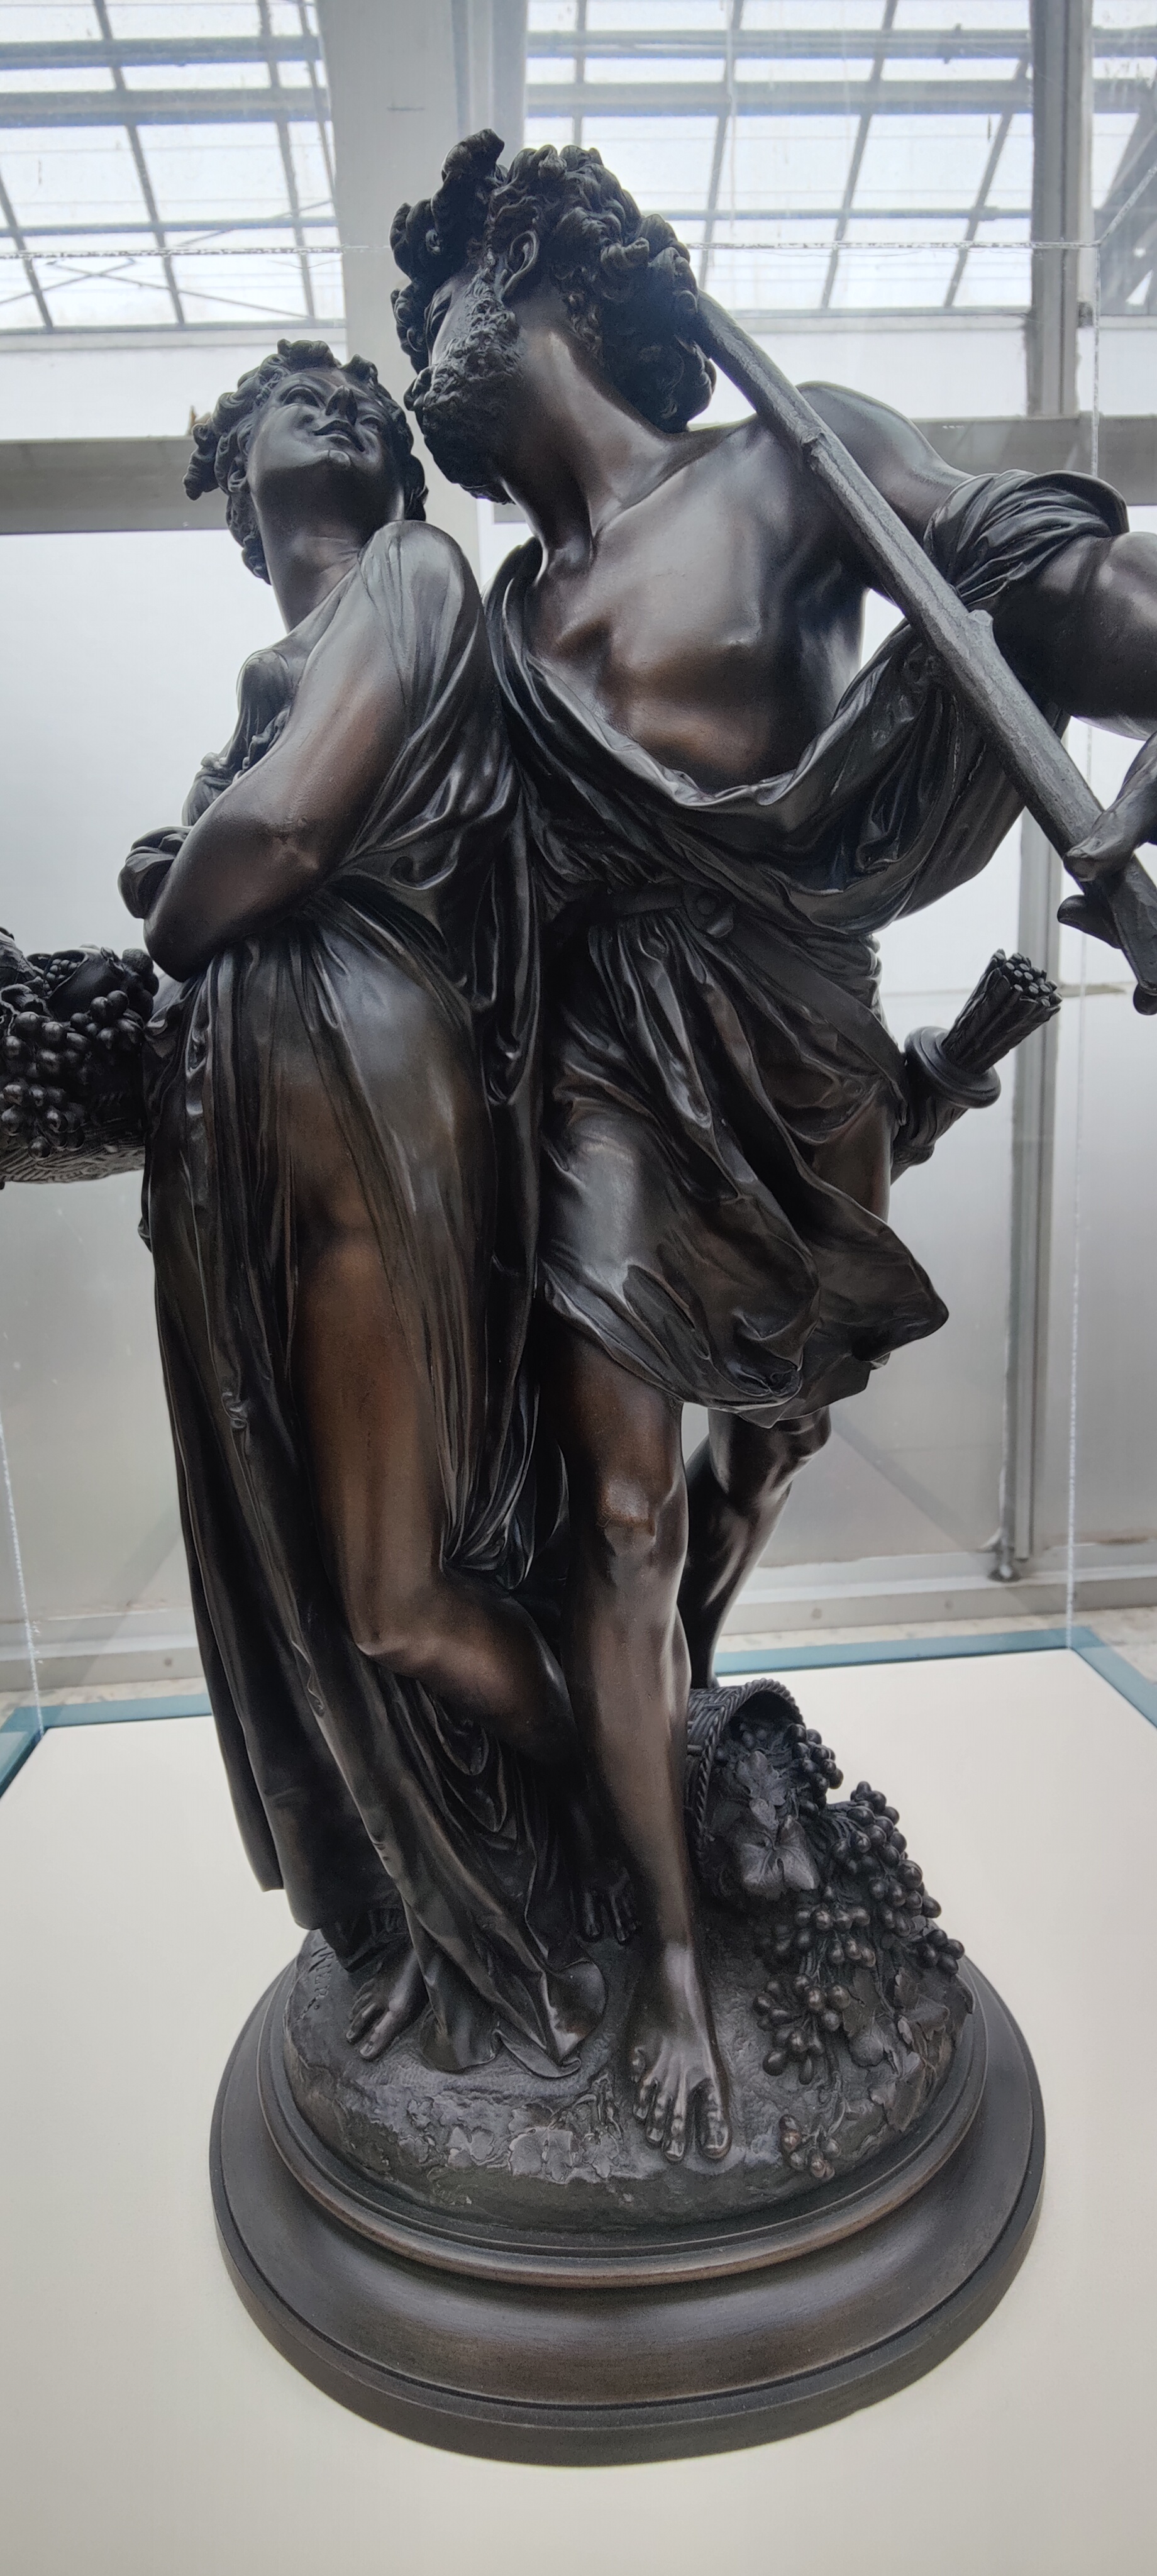 IDK about you, but despite the figure on the right being male-presenting, this sculpture really gives off sapphic-love vibes. (Albert Ernest Carrier-Belleuse. _Autumn Lovers_, 1857.)